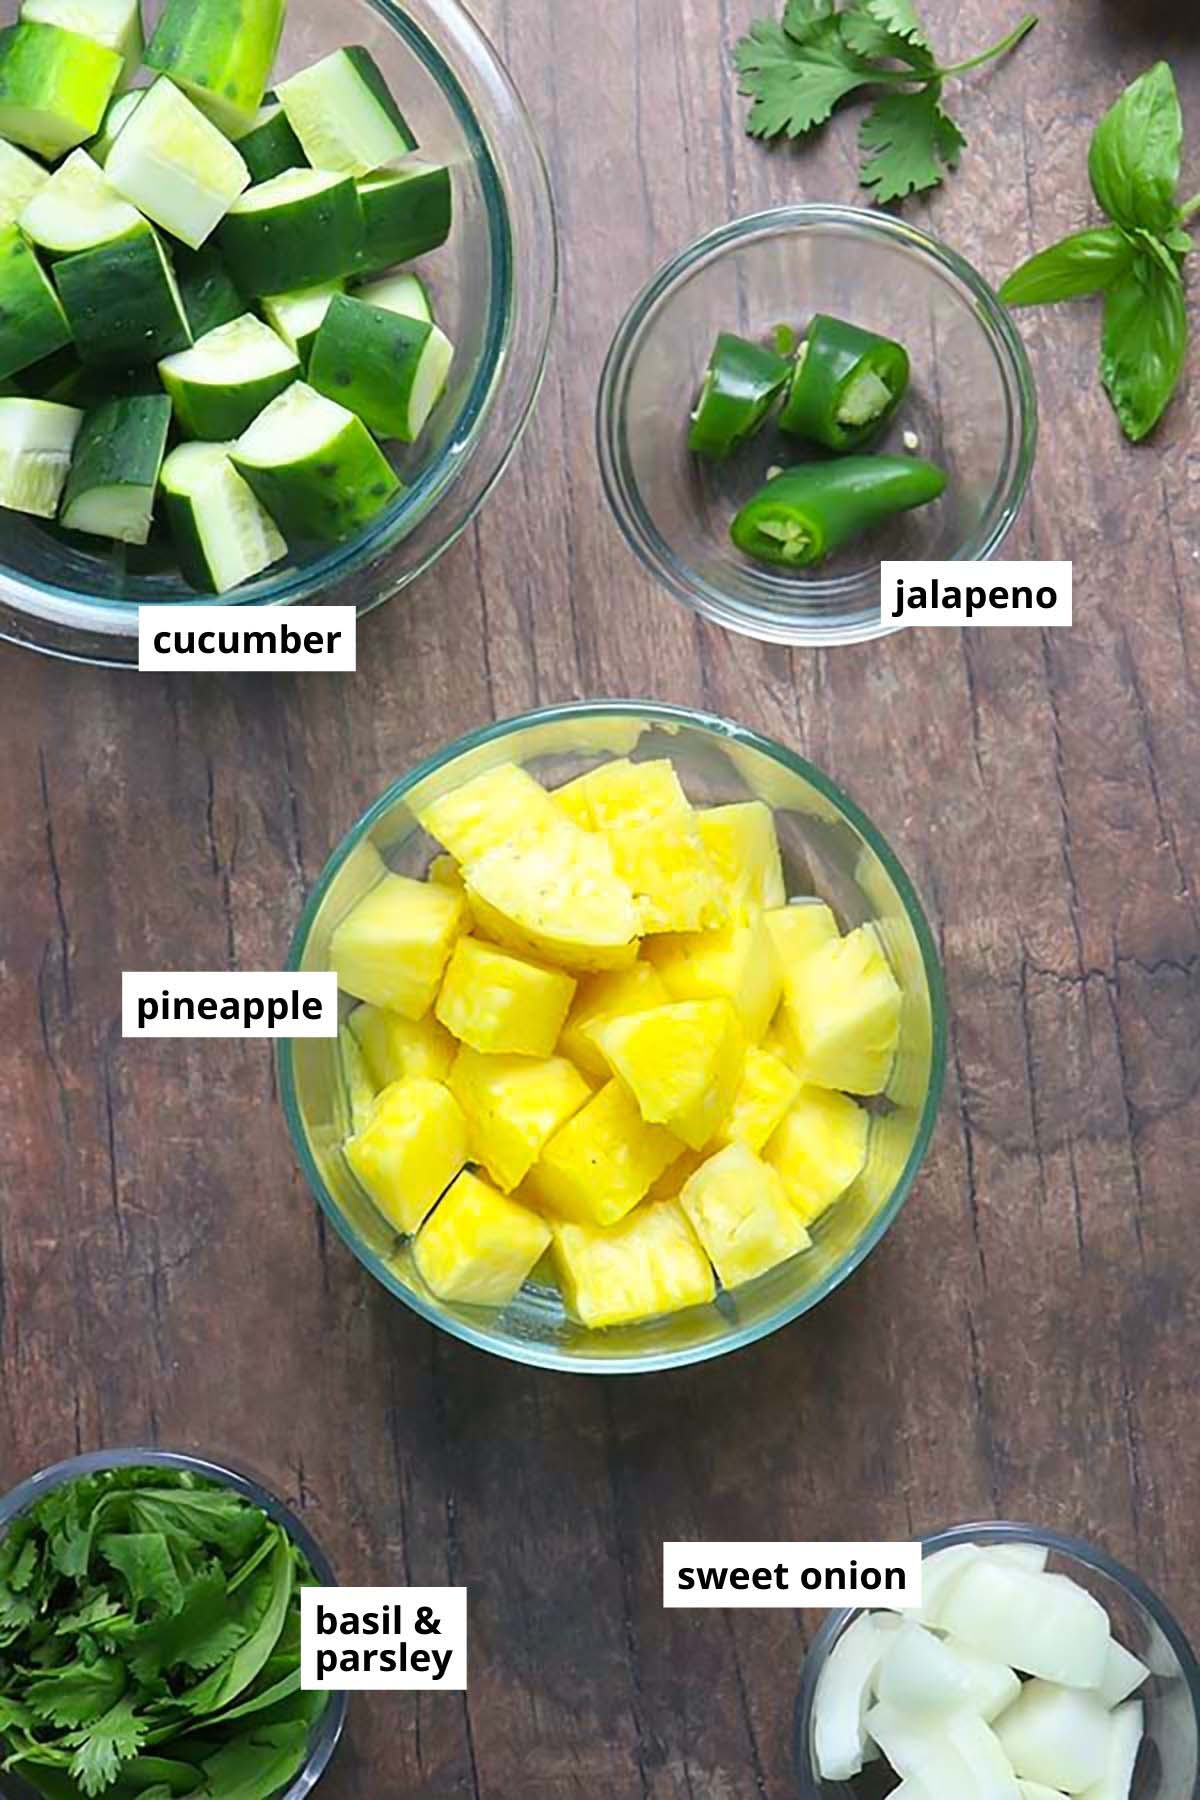 pineapple, cucumber, herbs, onion, and jalapeno in bowls on a wooden table with text labels